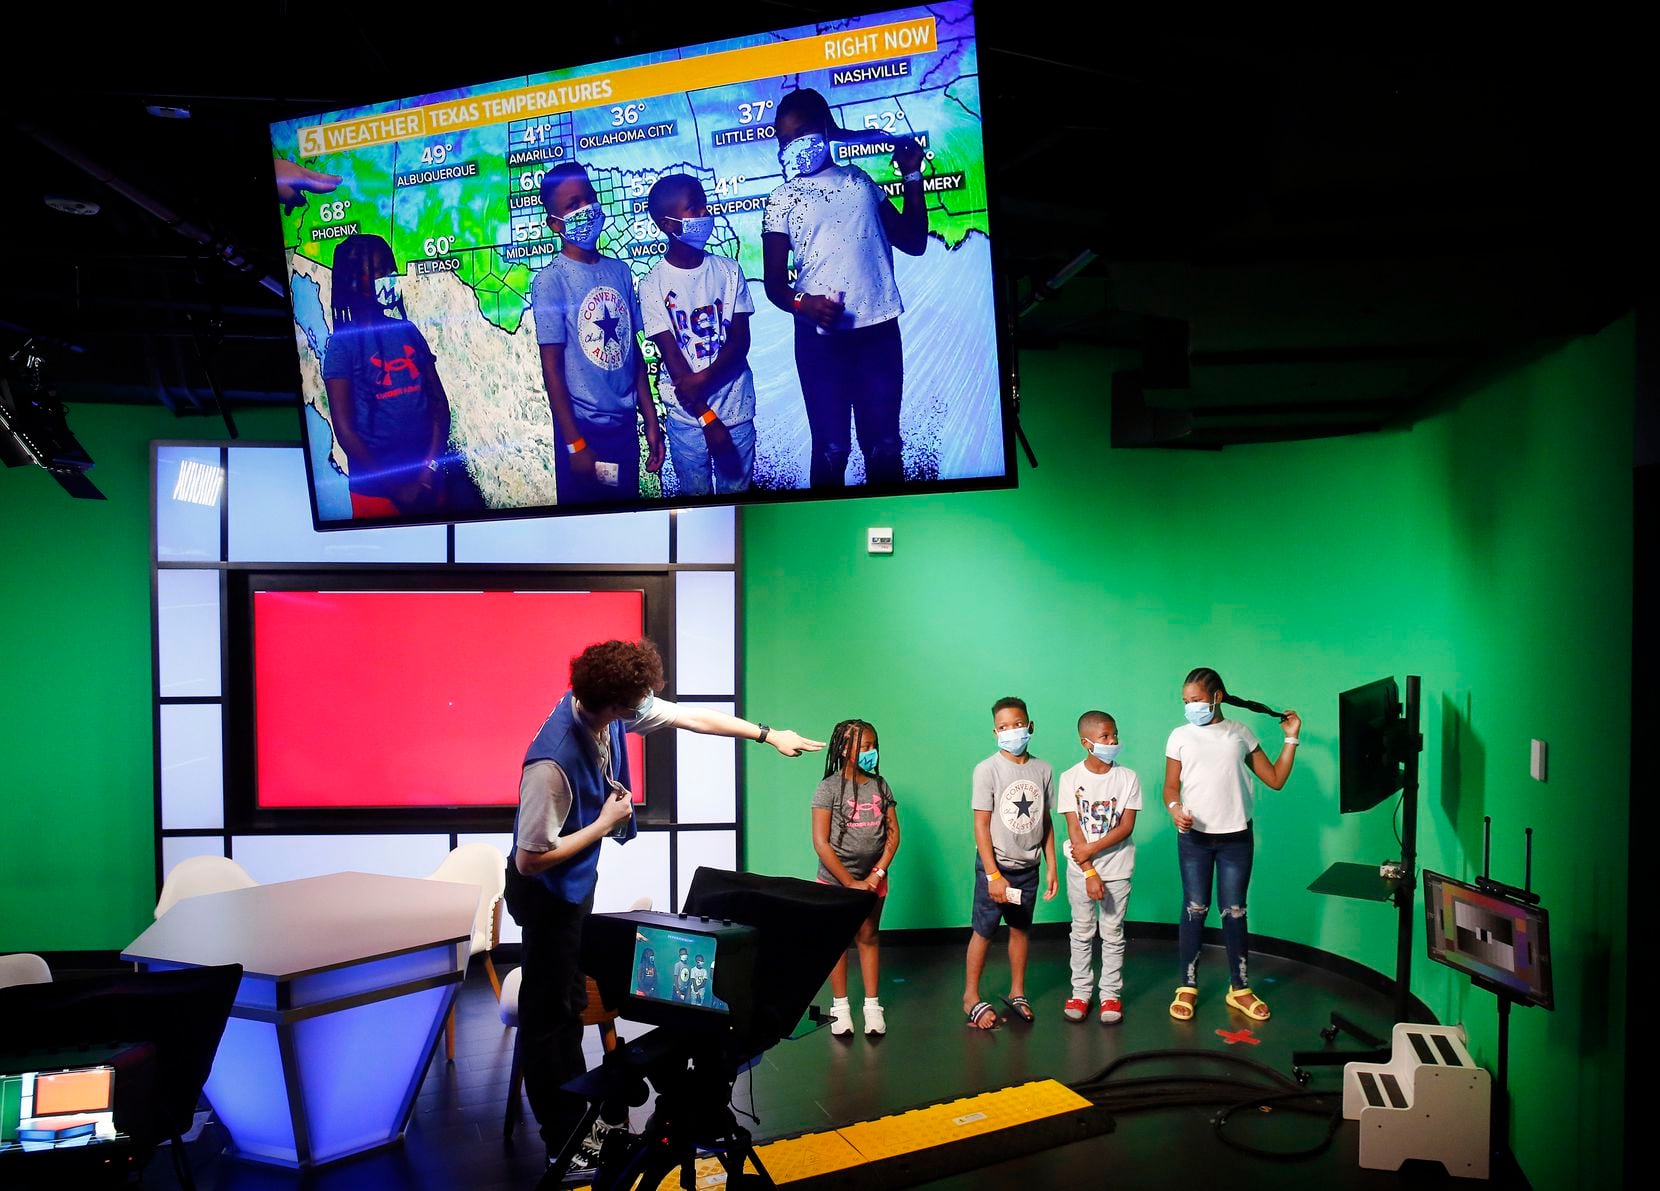 Kids stand before green screen as they deliver the weather forecast in a kid-sized WFAA television studio at KidZania Dallas, the company's only United States location at Stonebriar Mall At The Bridges in Plano, Texas, July 16, 2021. (Tom Fox/The Dallas Morning News)